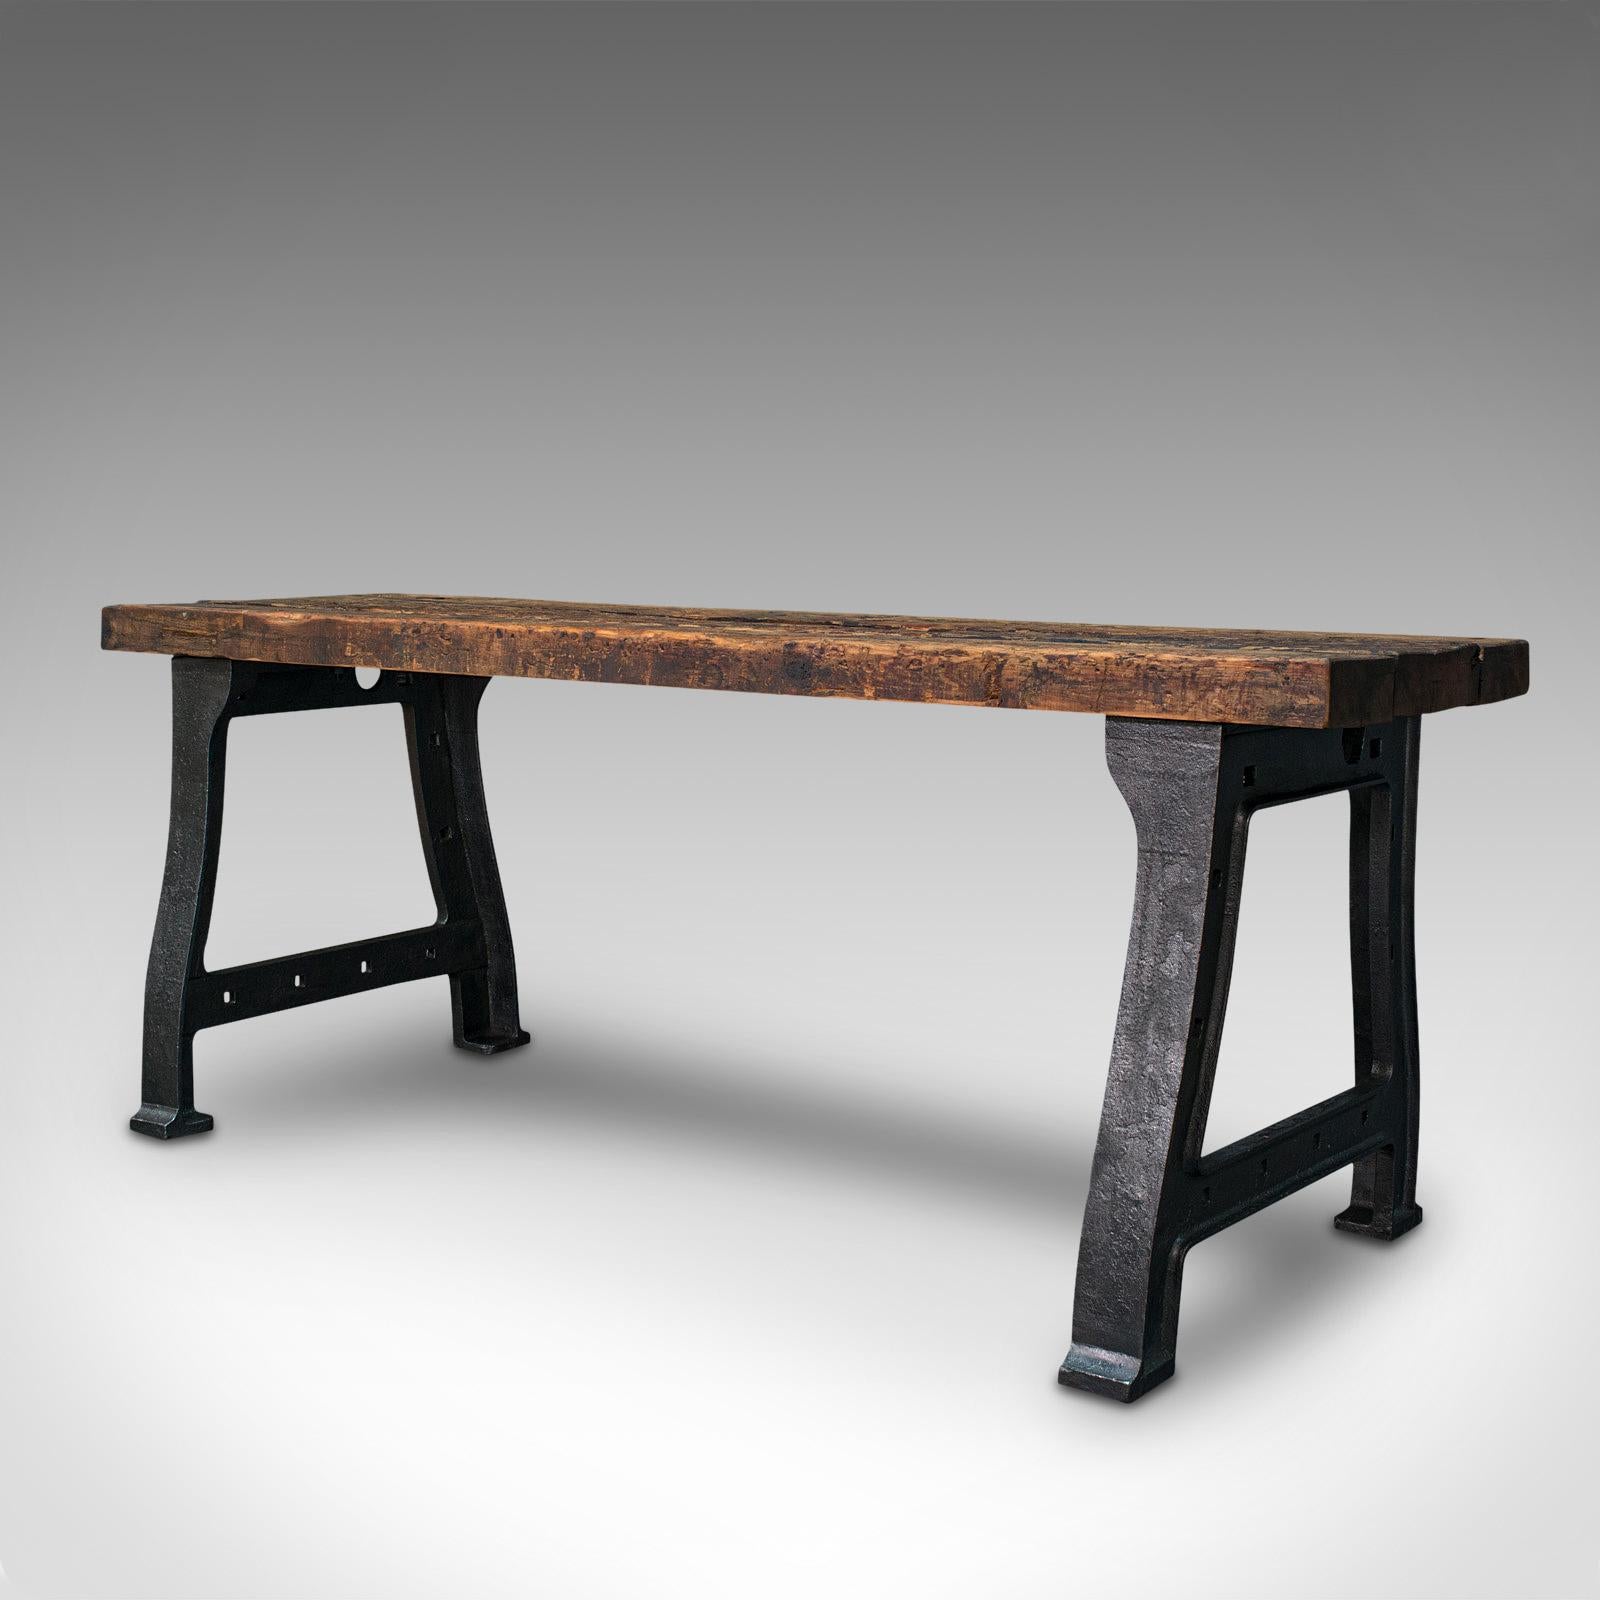 British Antique Foundry Table, English, Pine, Iron, Heavy, Industrial Taste, Victorian For Sale